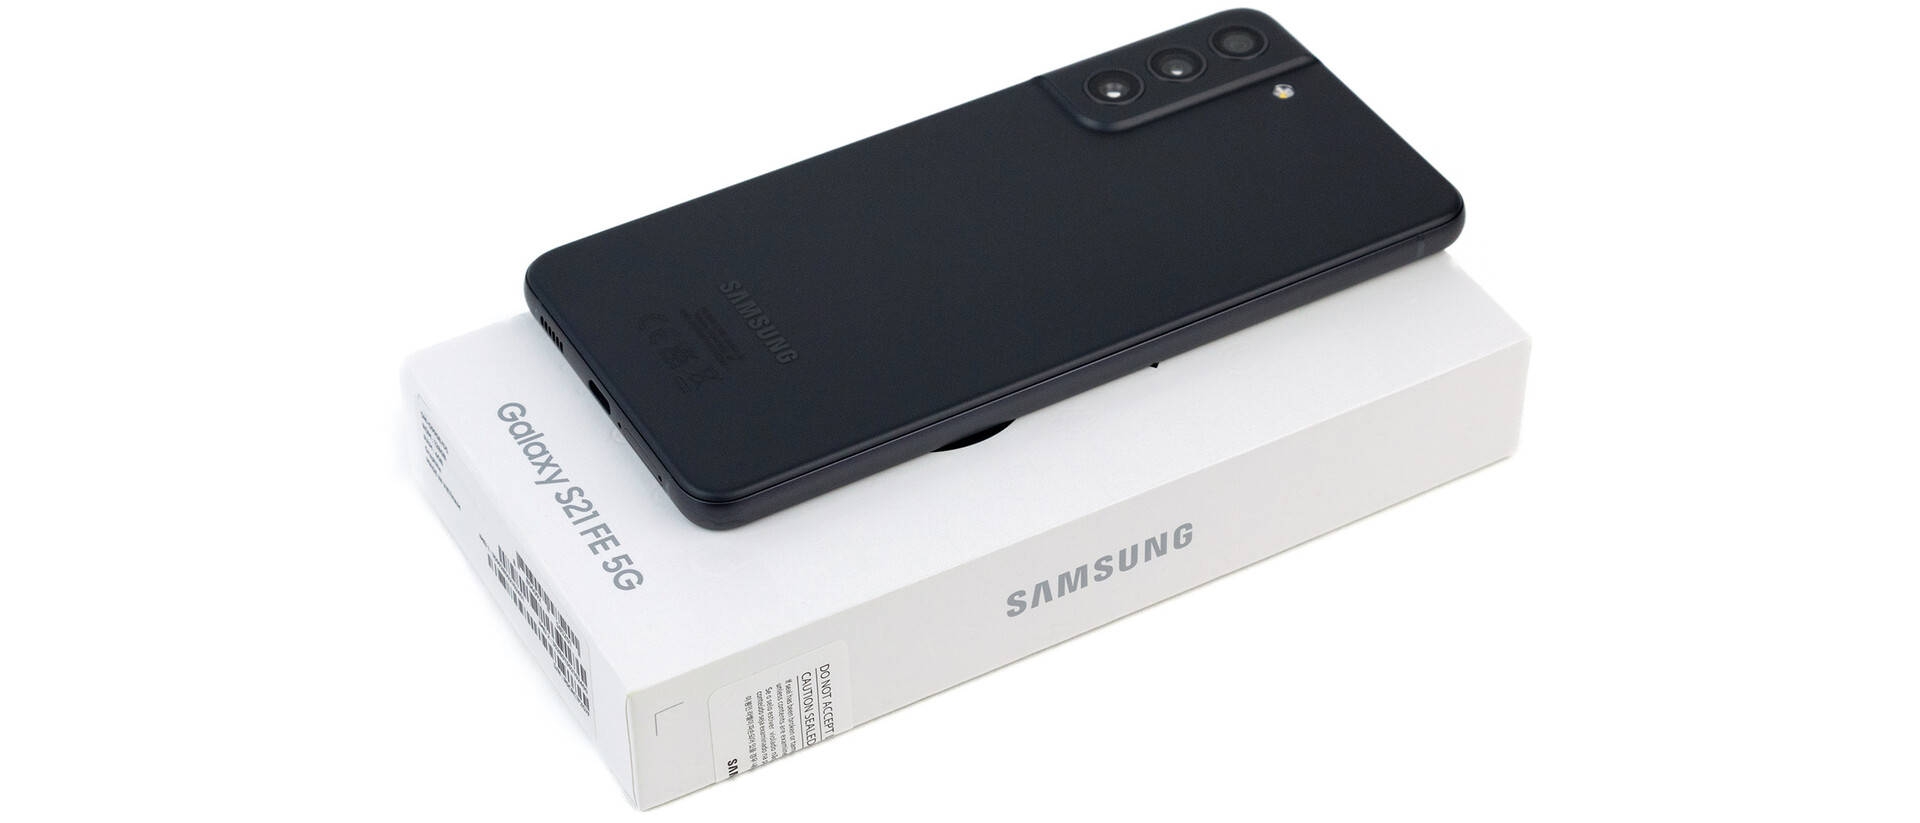 Samsung Galaxy S21 FE 5G review: Software, performance